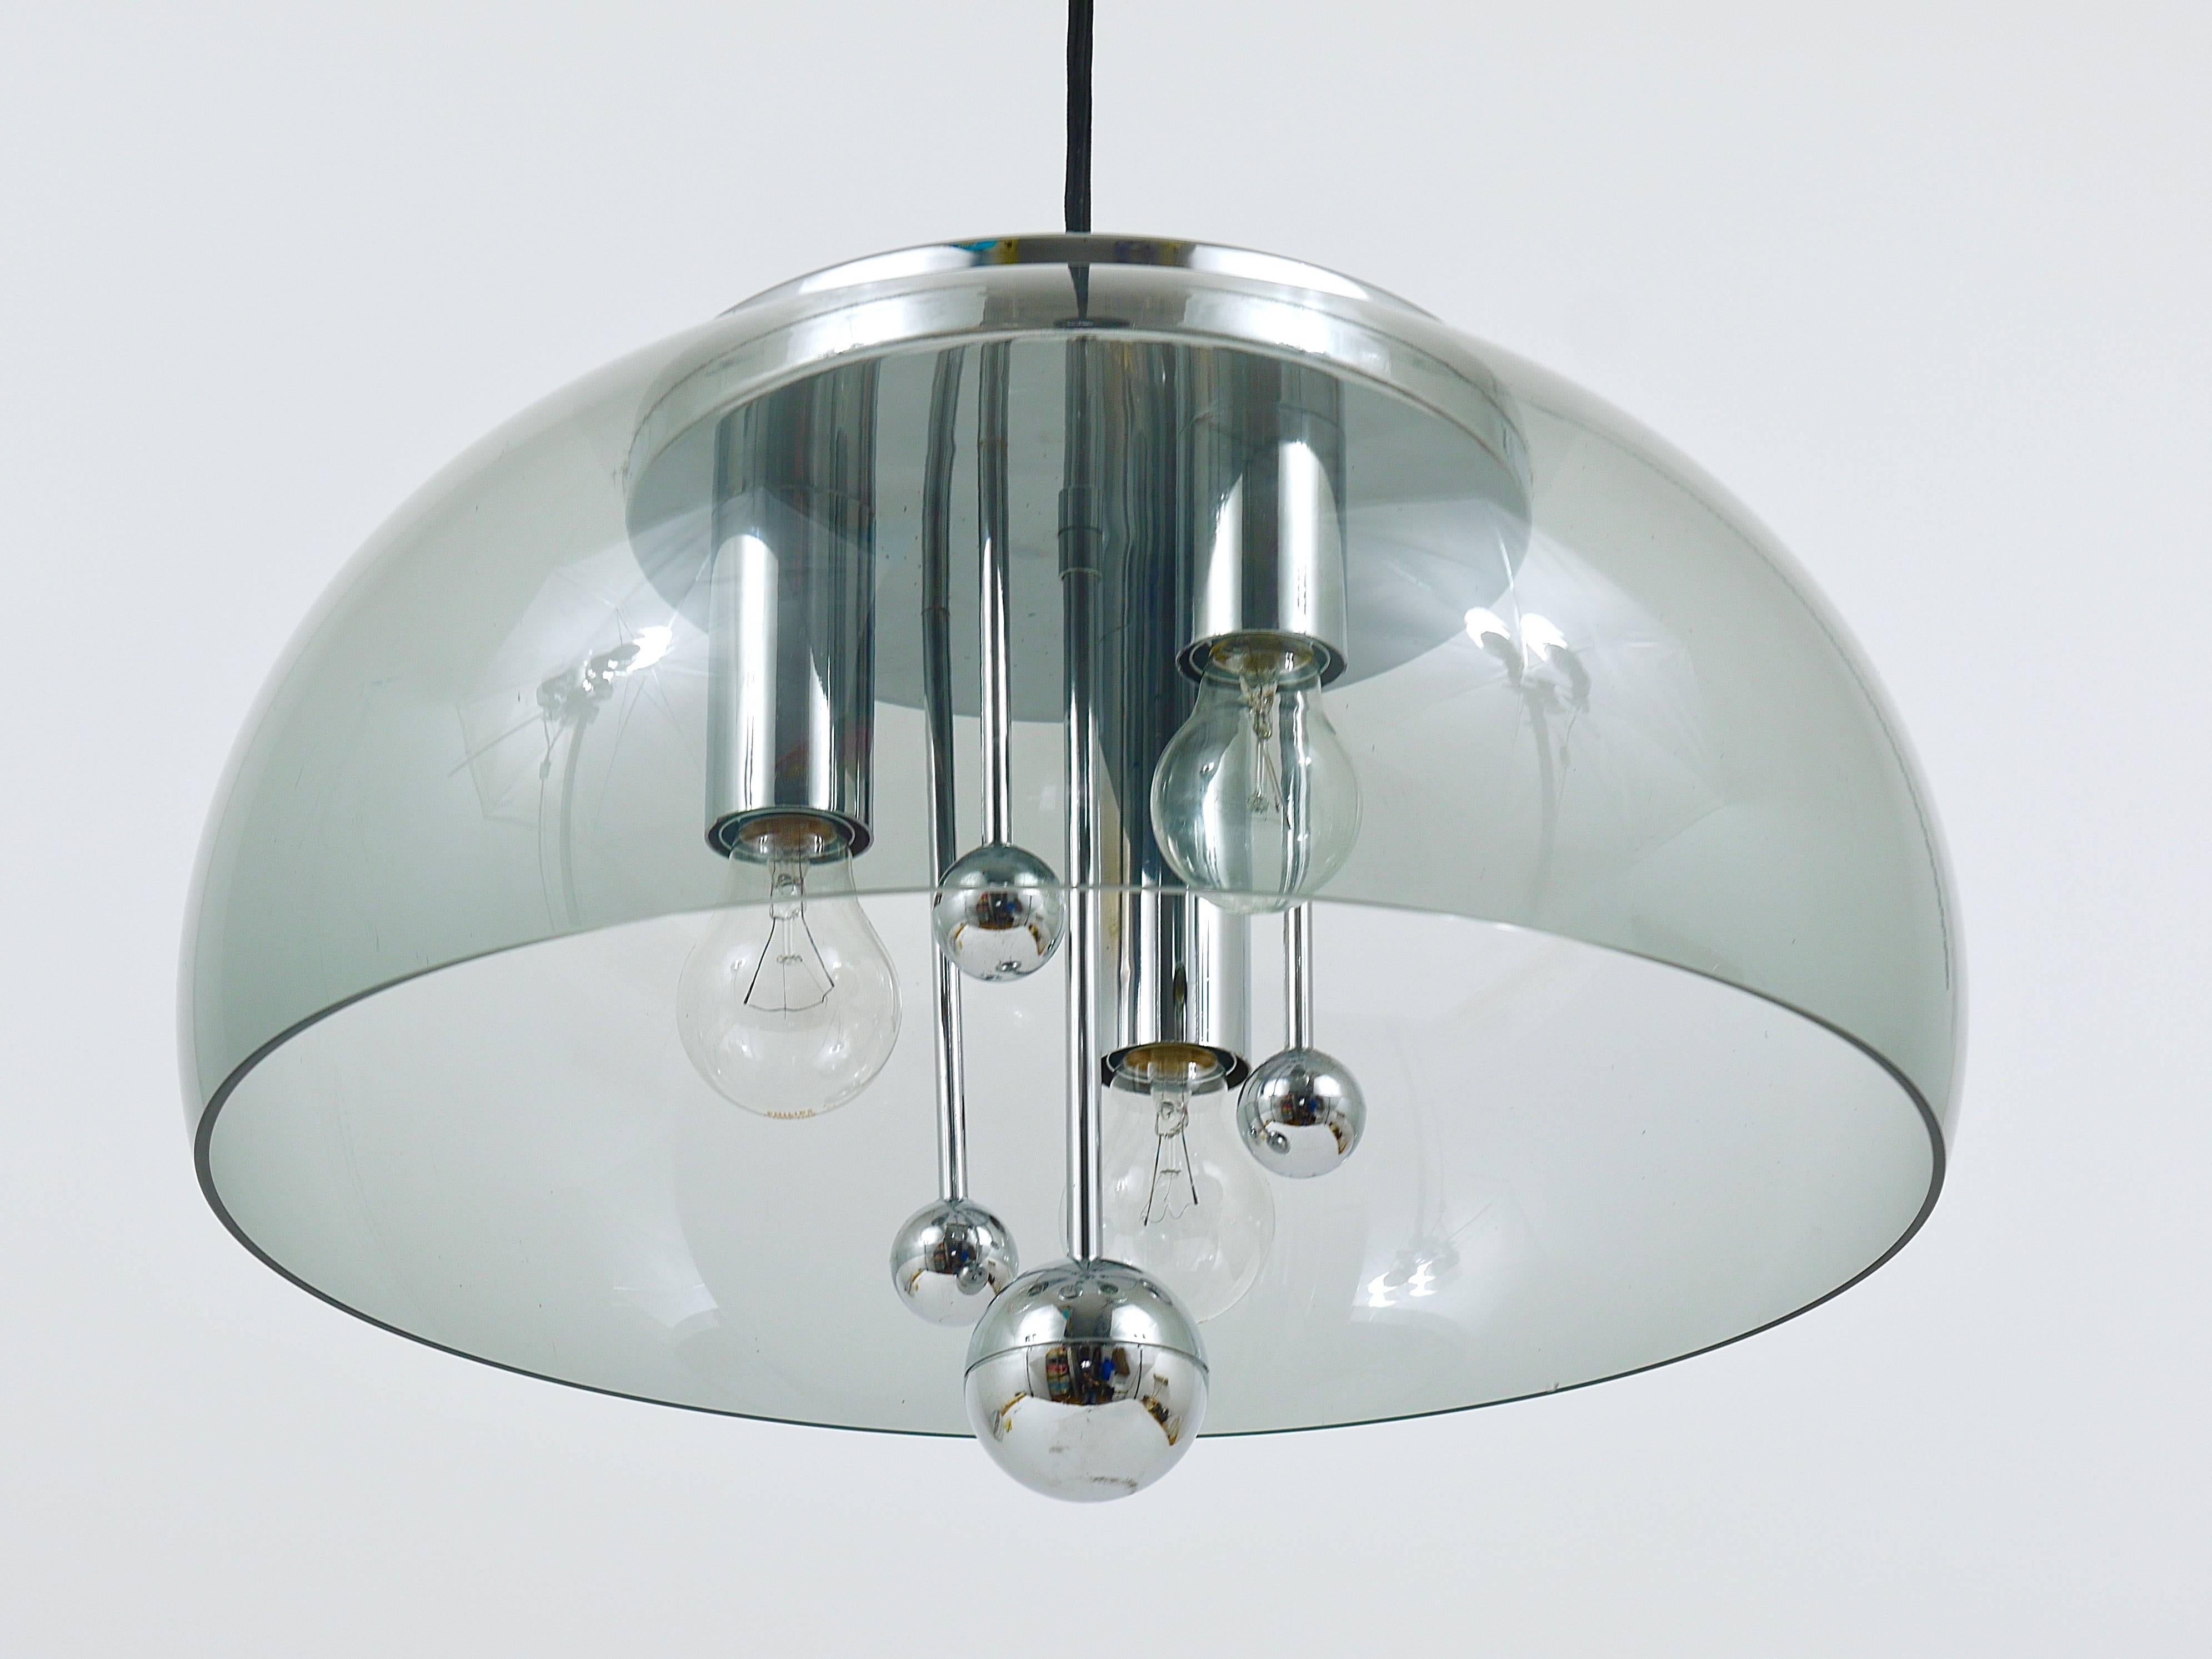 Midcentury Space Age Globe Pendant Lamp with Chromed Spheres, Germany, 1970s For Sale 5